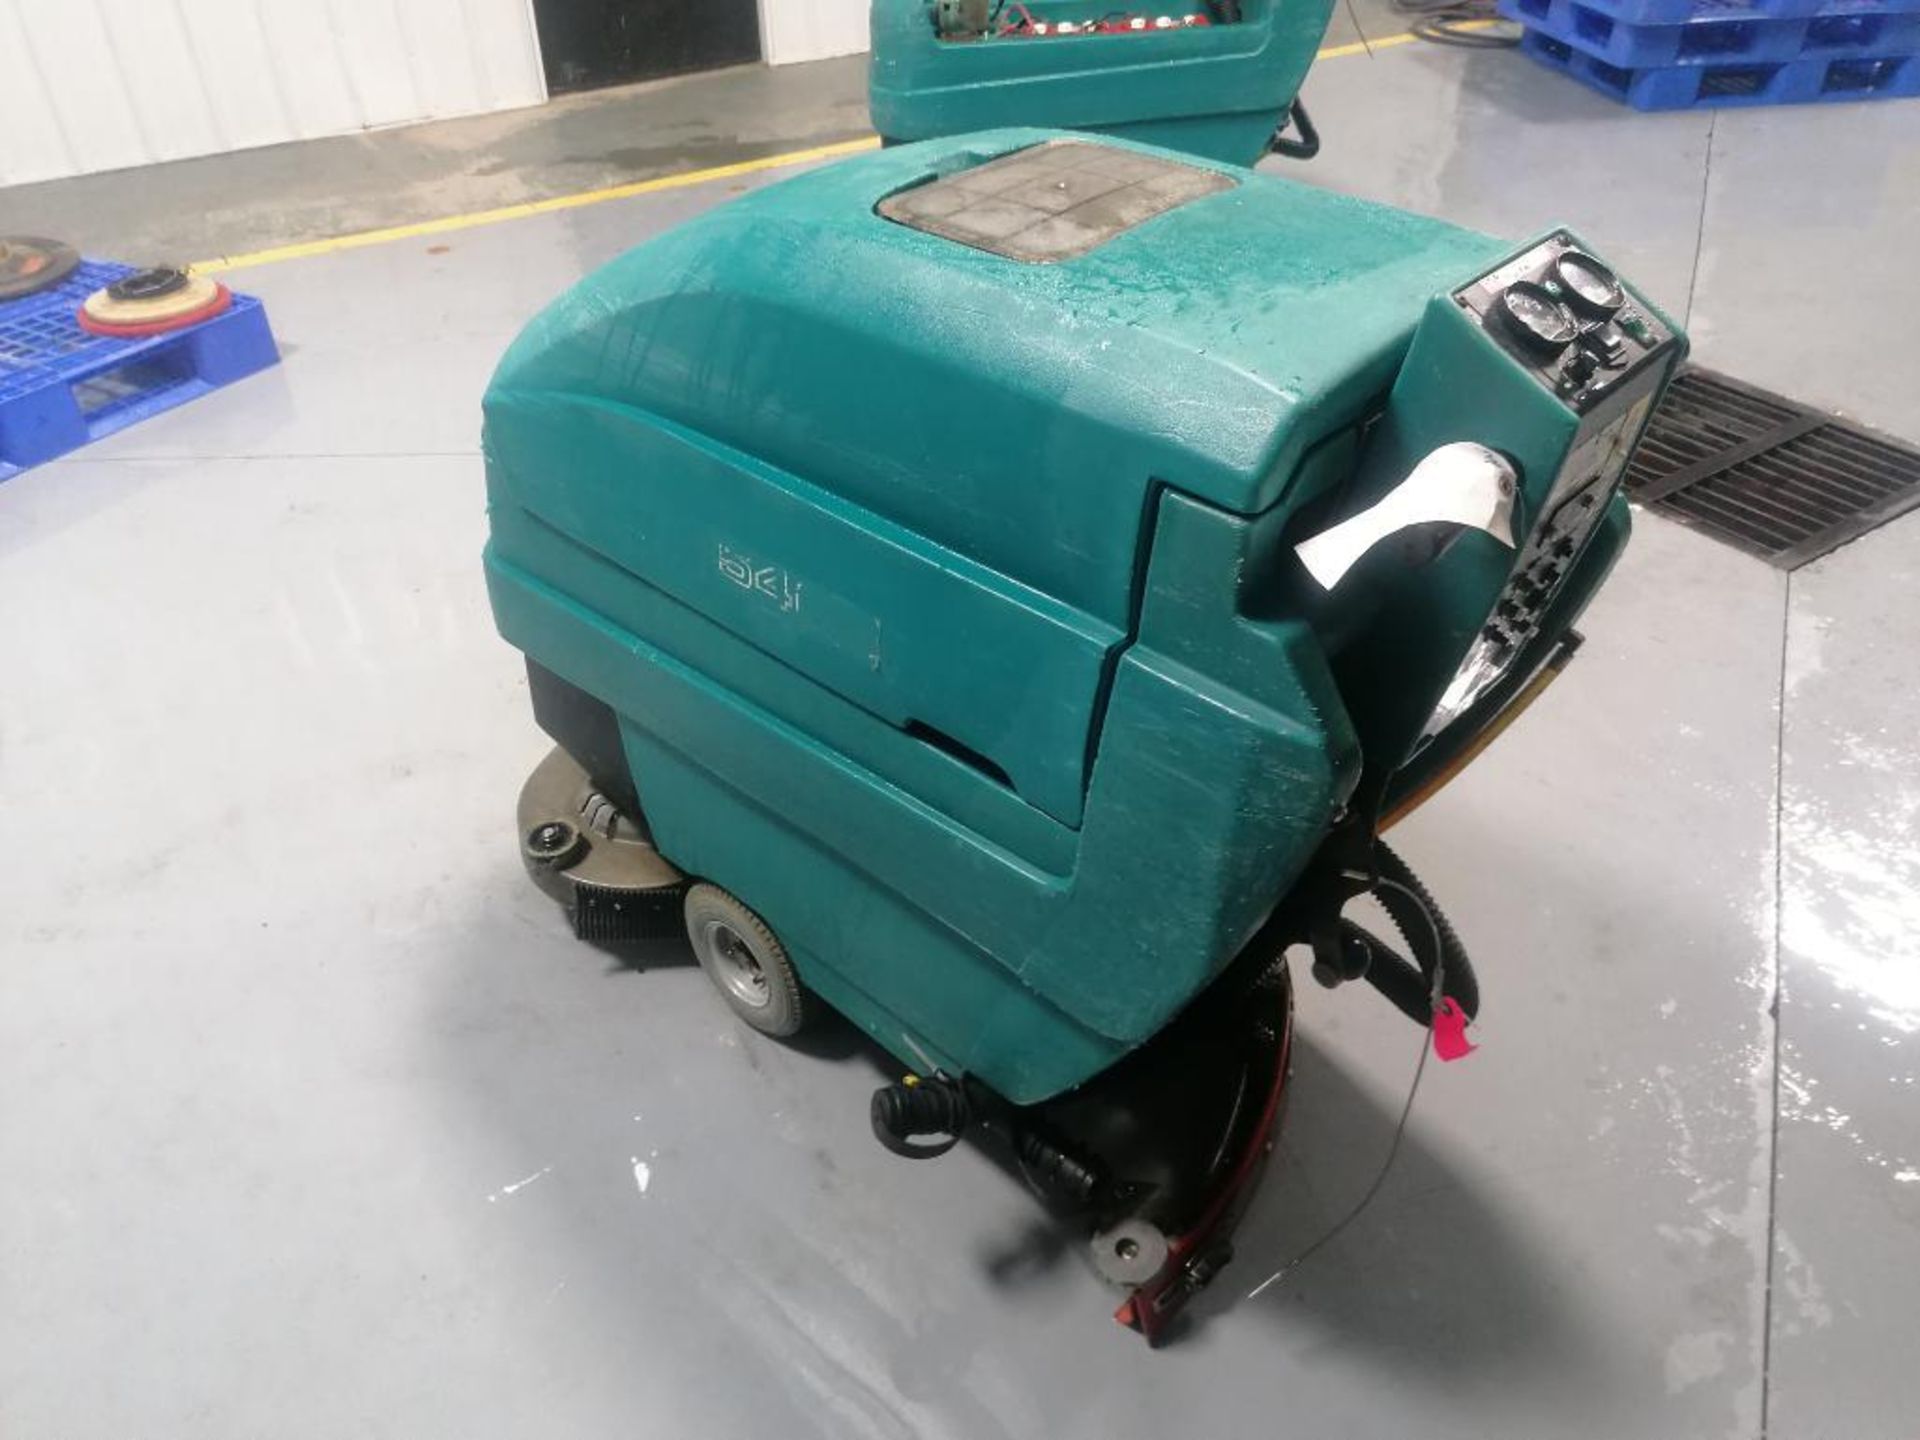 Tennant 5400 Floor Scrubber, Serial #540010203098, 24 Volts. Located in Mt. Pleasant, IA. - Image 4 of 17